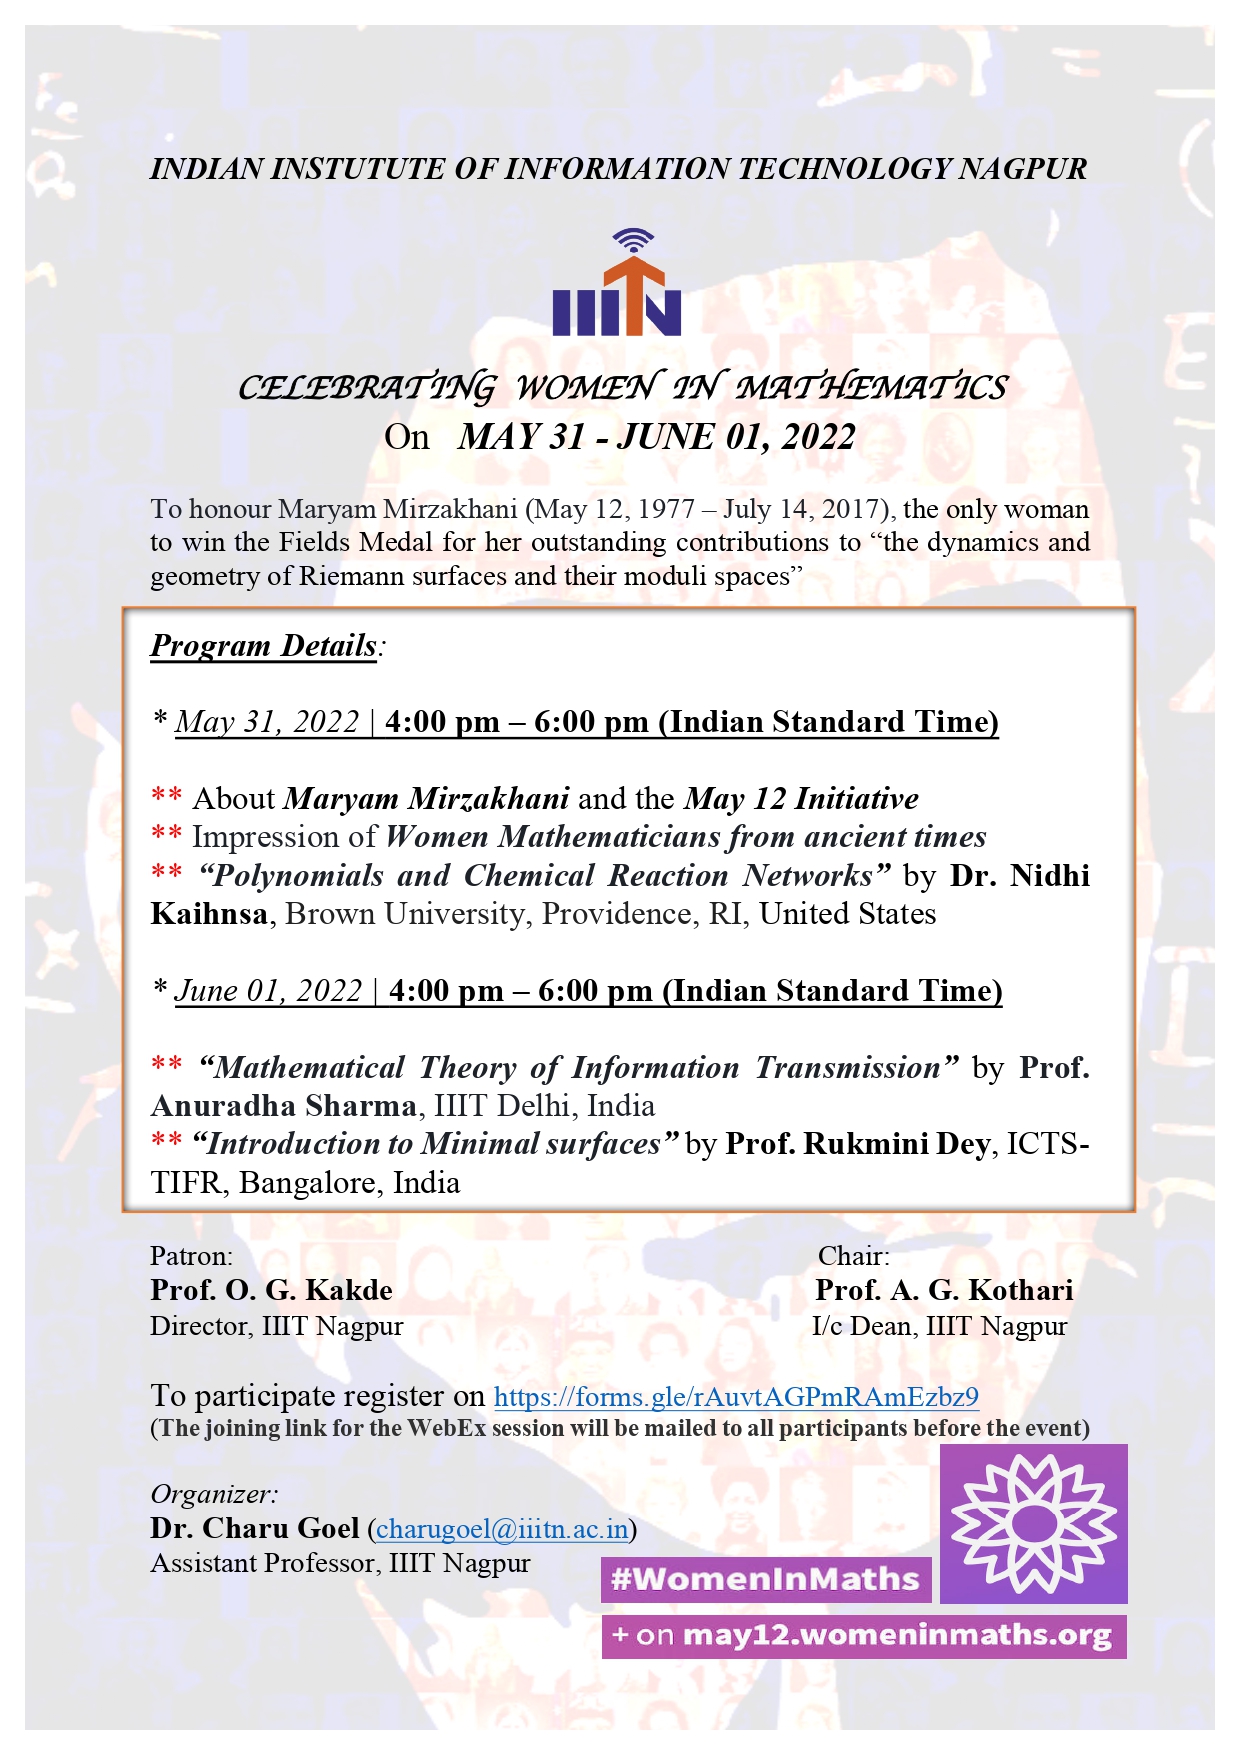 Online International Event - Celebrating Women in Mathematics from May 31 - June 01, 2022 - Organised by Department of Basic Sciences, IIIT Nagpur - Coordinator Dr. Charu Goel